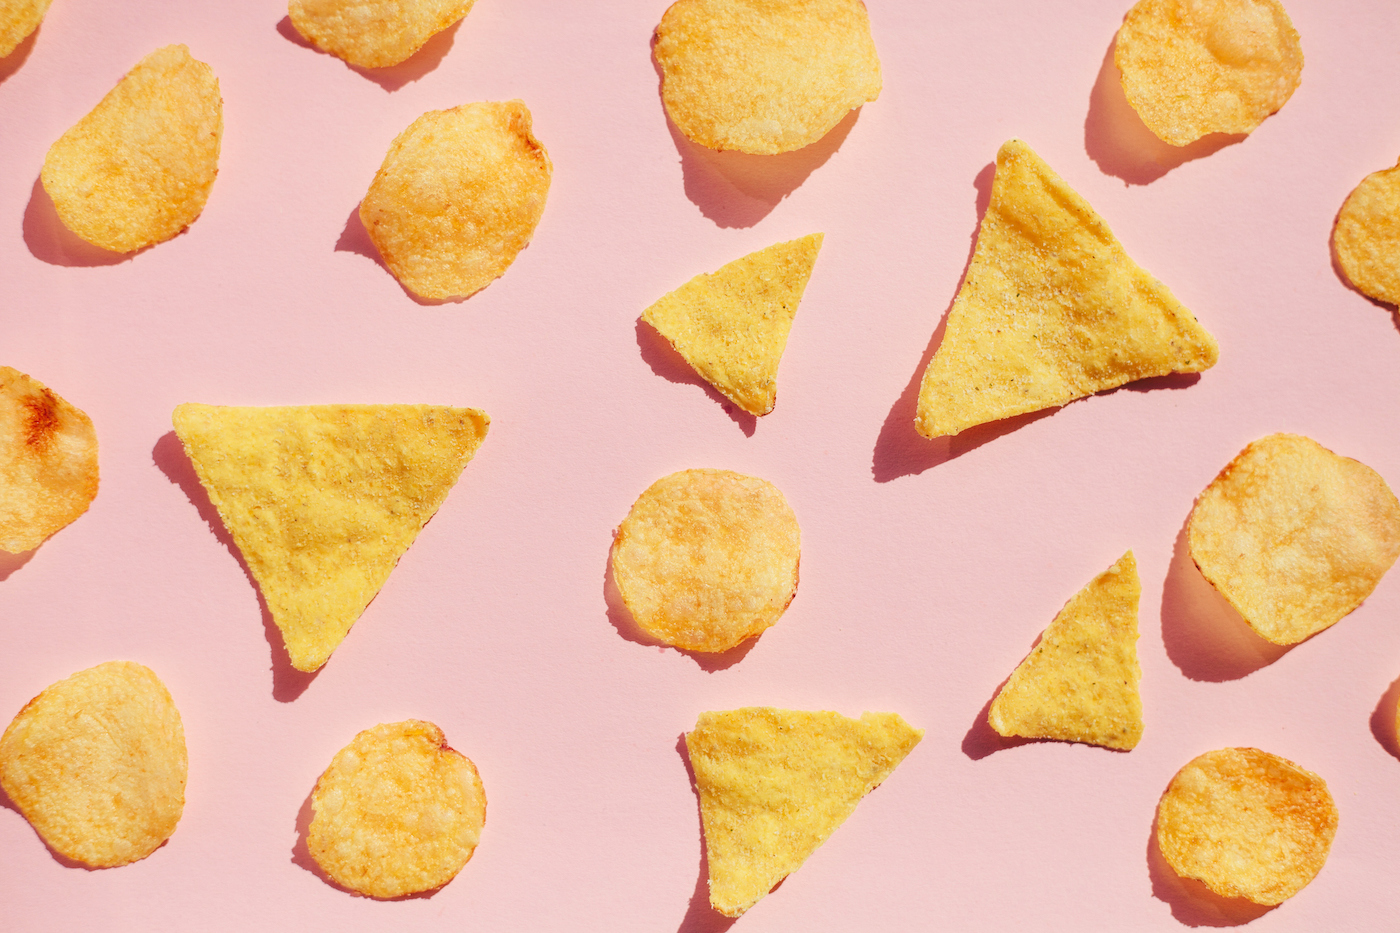 Pattern of potato chips over pink background, strong light with shadows.  Concept of unhealthy junk food.